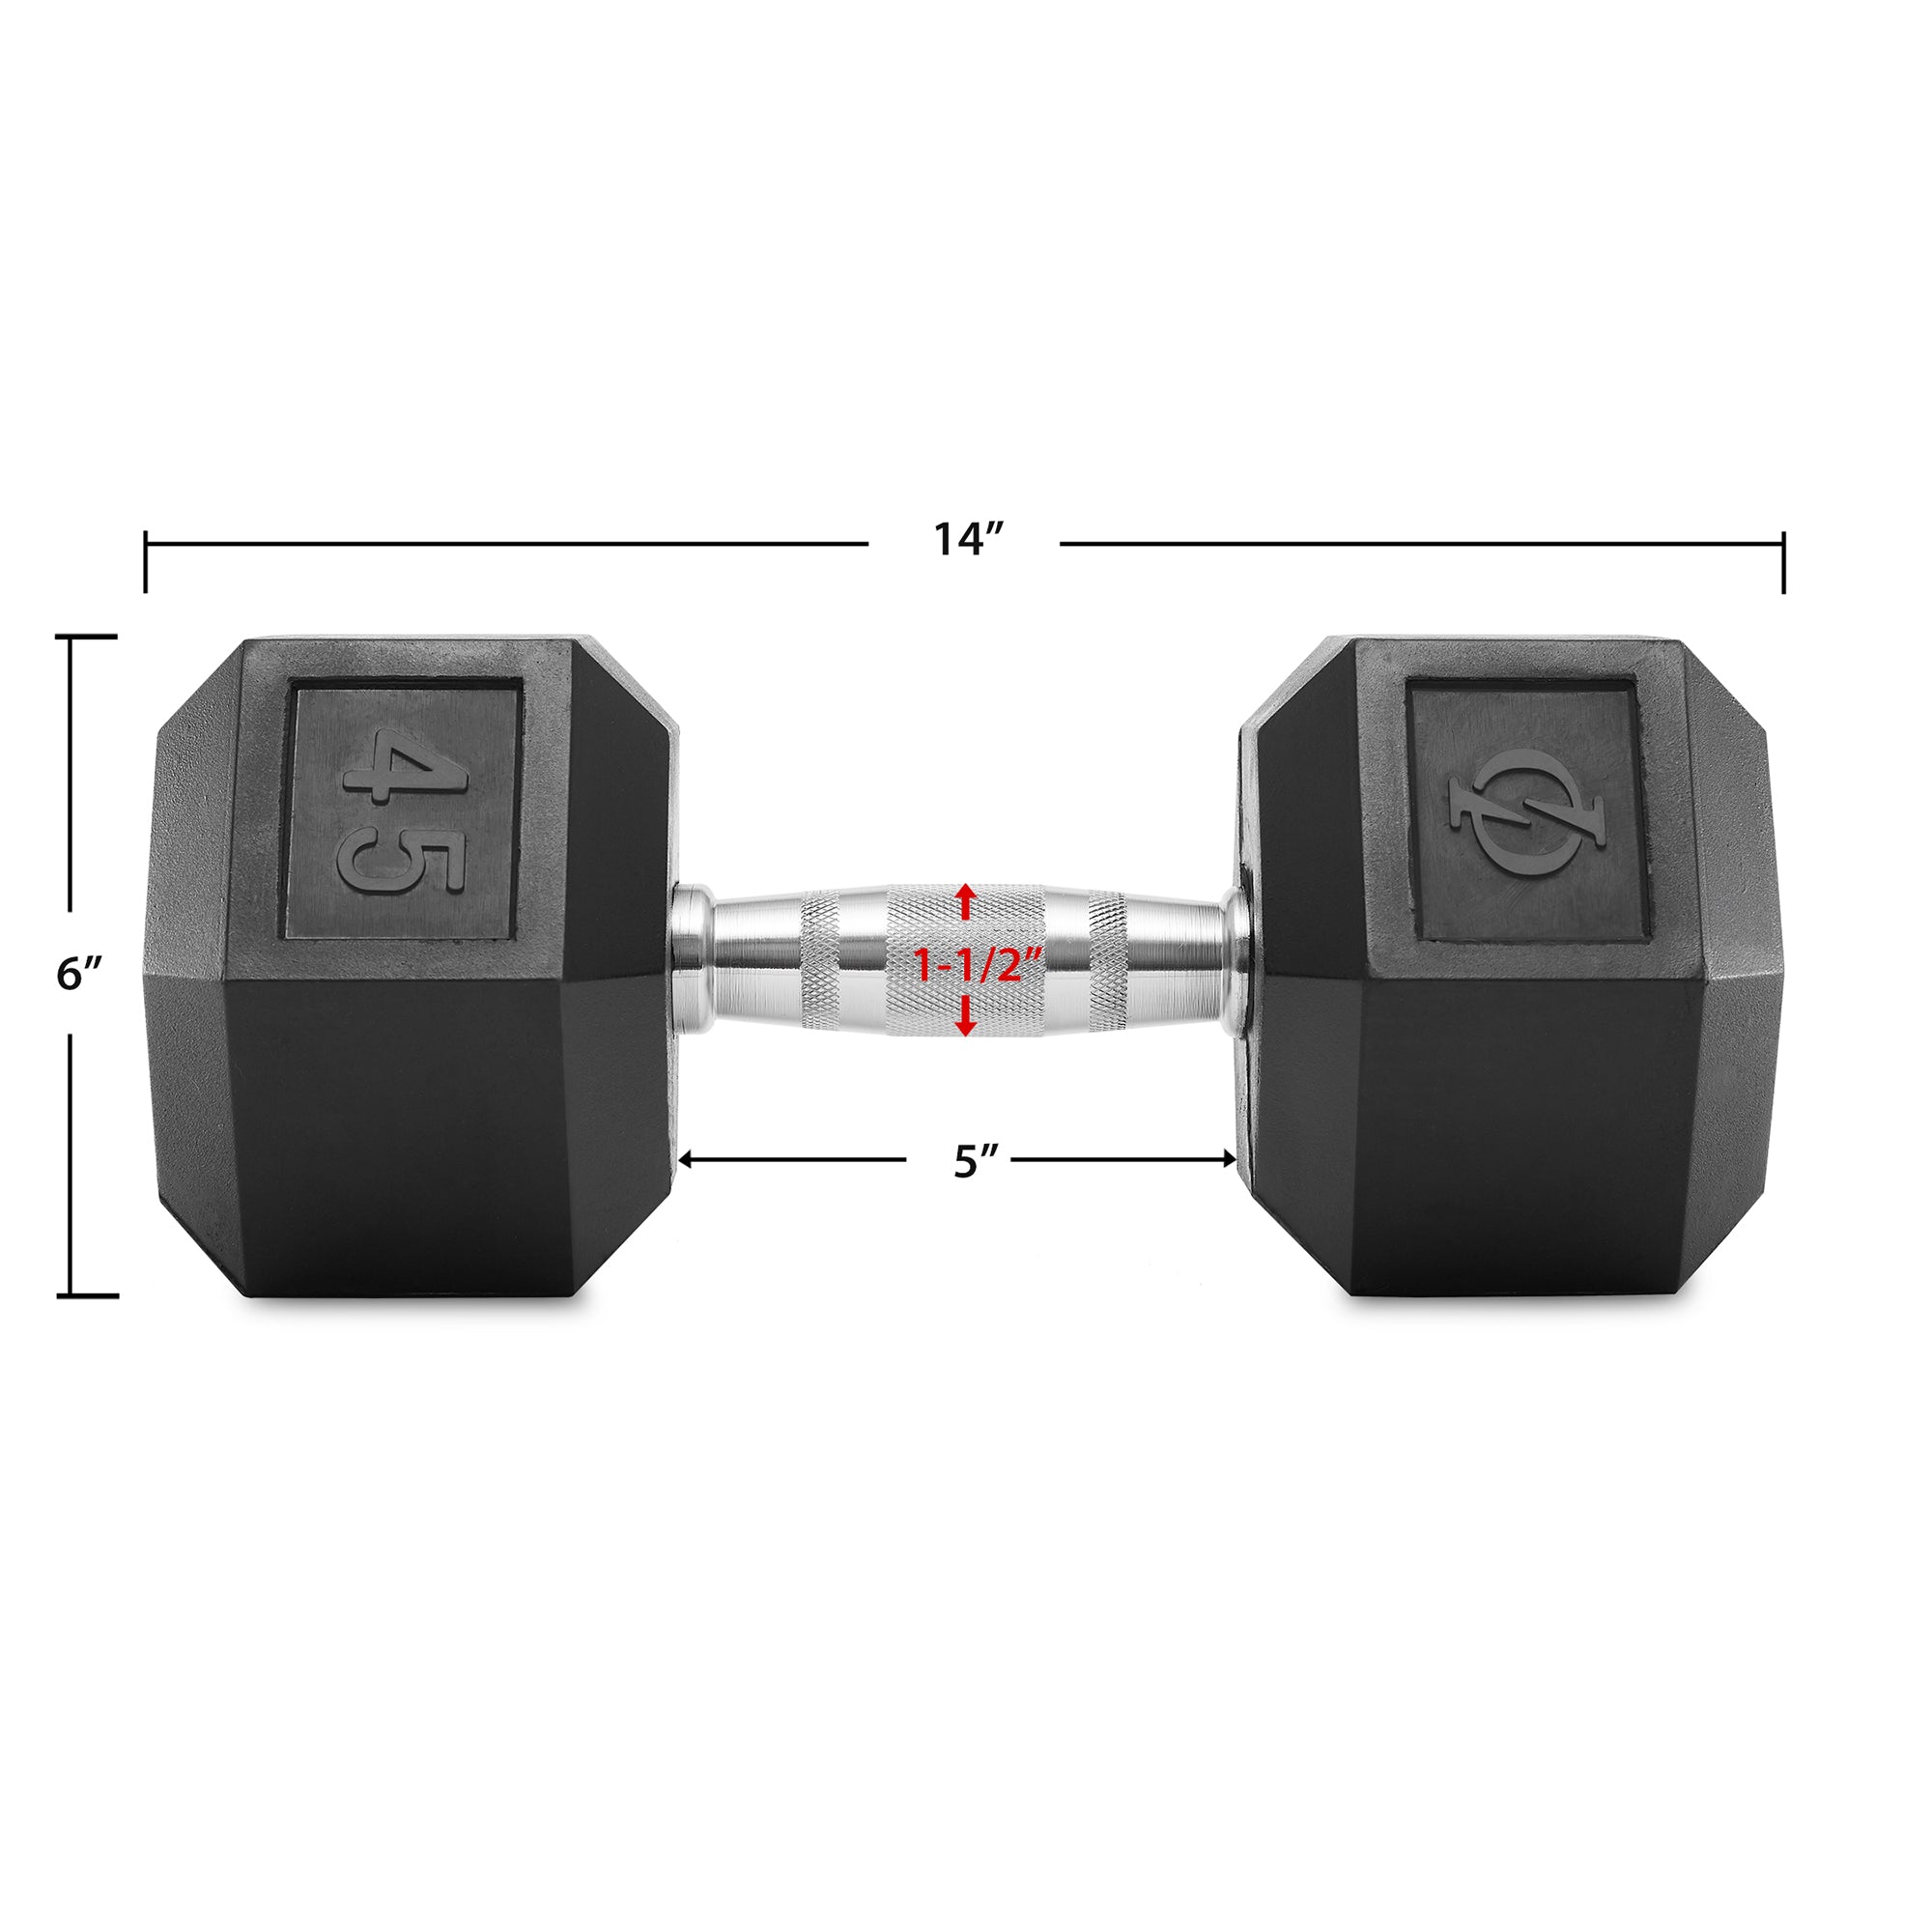 OPEN BOX - Rubber Coated Hex Dumbbell Hand Weight, 45 lbs - Workout Training